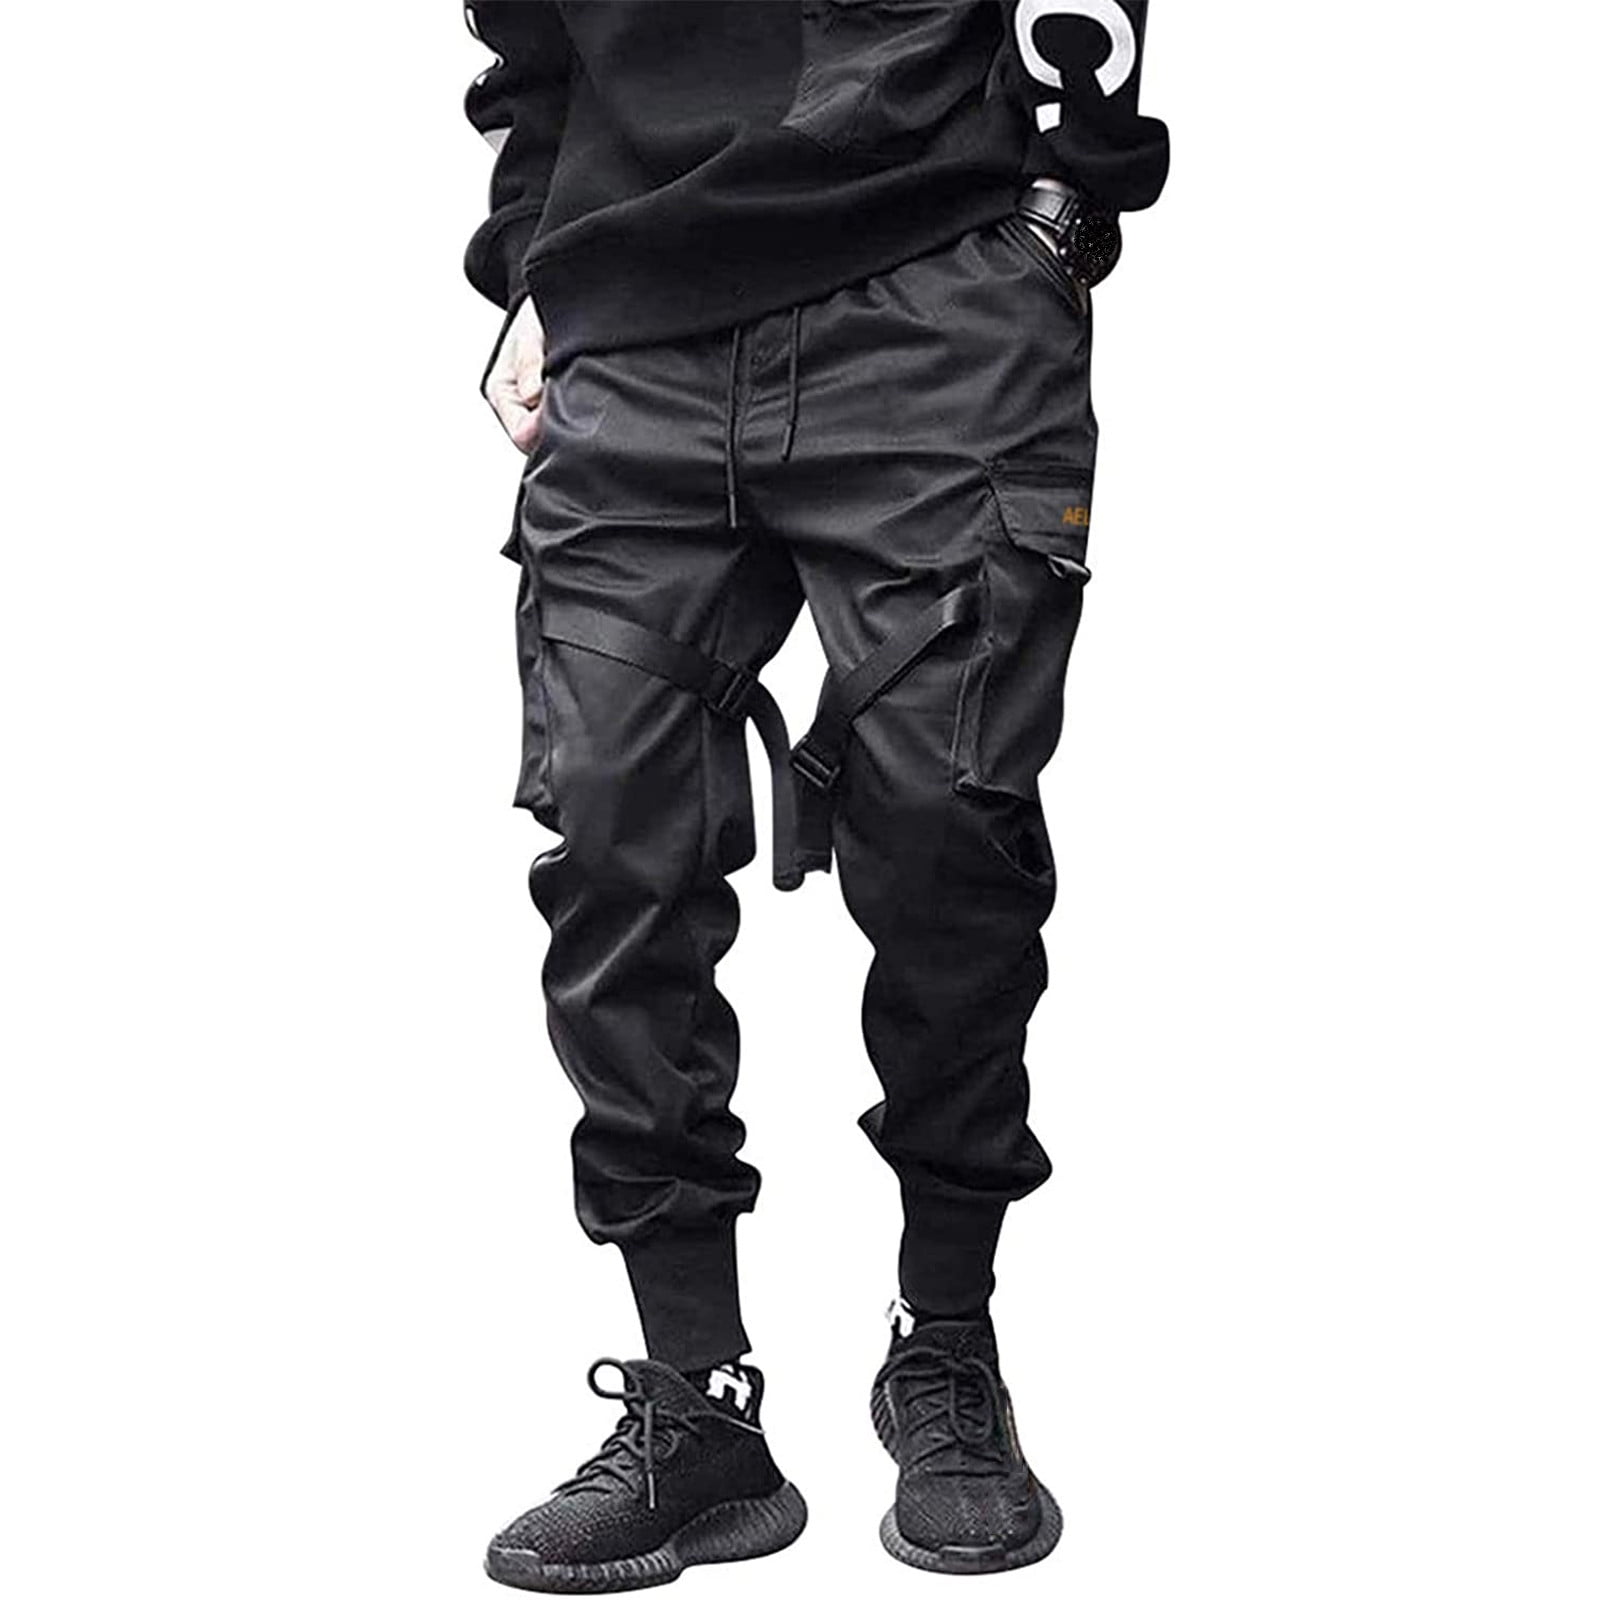 5 Colors Men‘s Loose Outdoor Cargo Sports Casual Pants Overalls hip-hop Trousers 